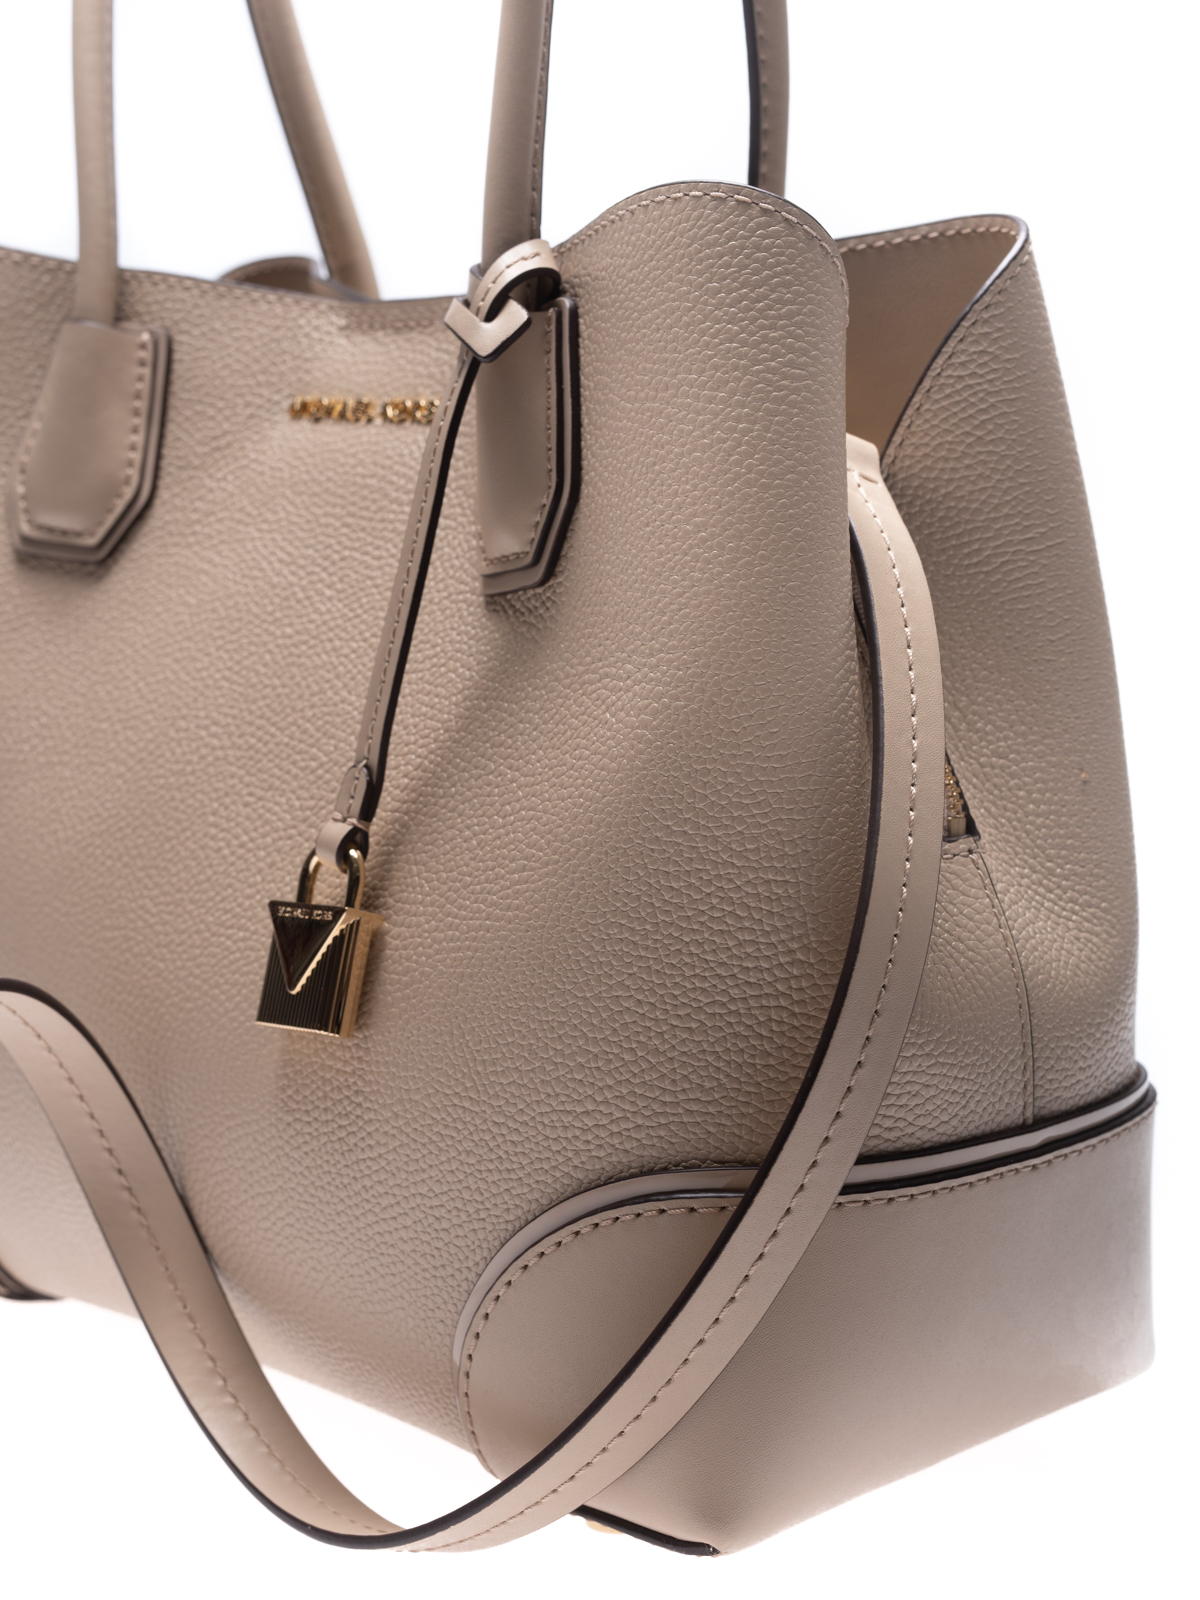 Totes bags Michael Kors - Mercer Gallery M beige leather bag - 30H7GZ5T6A552